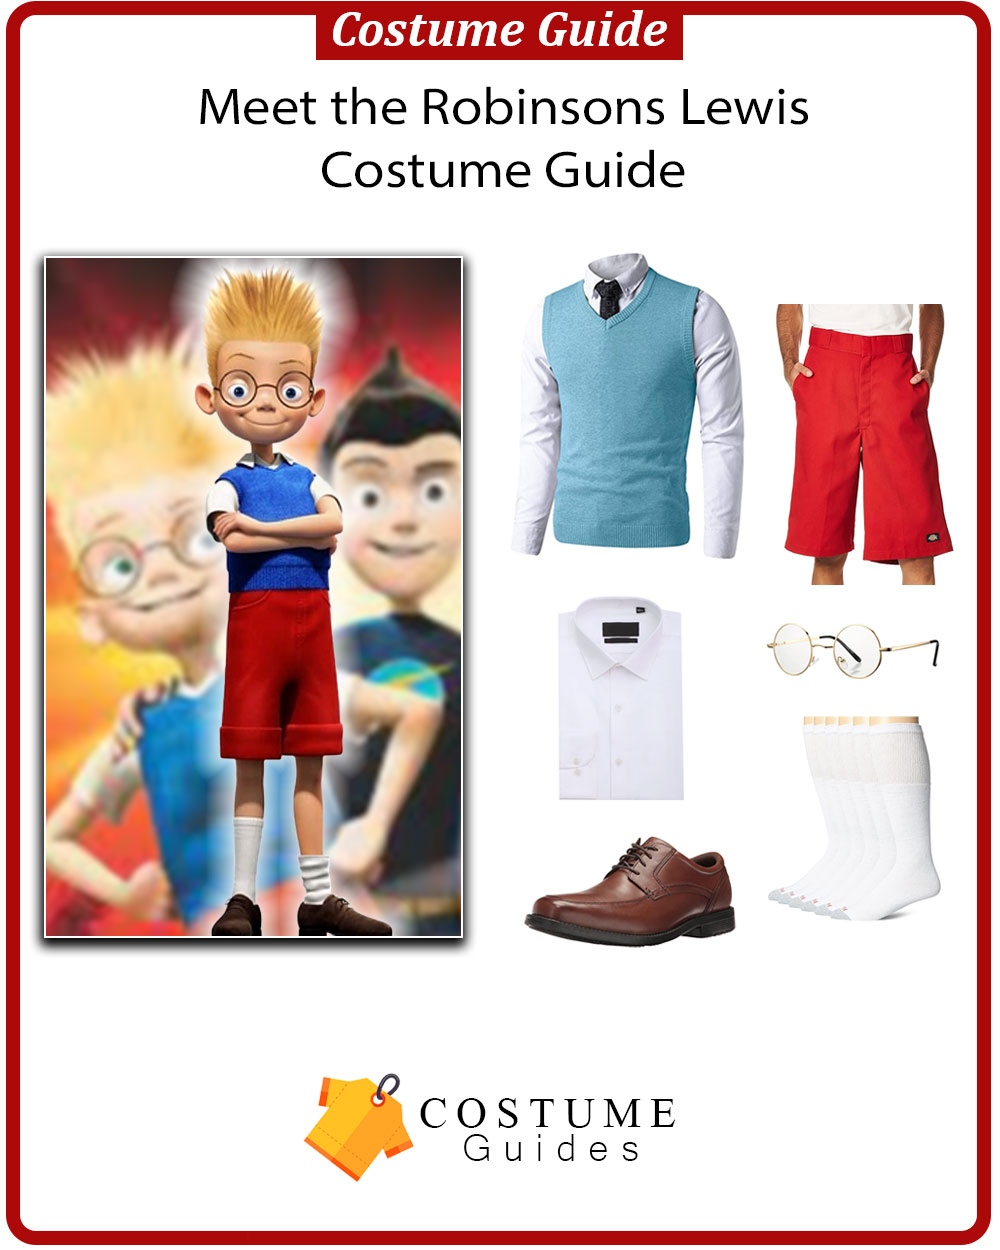 meet-the-robinsons-lewis-costume